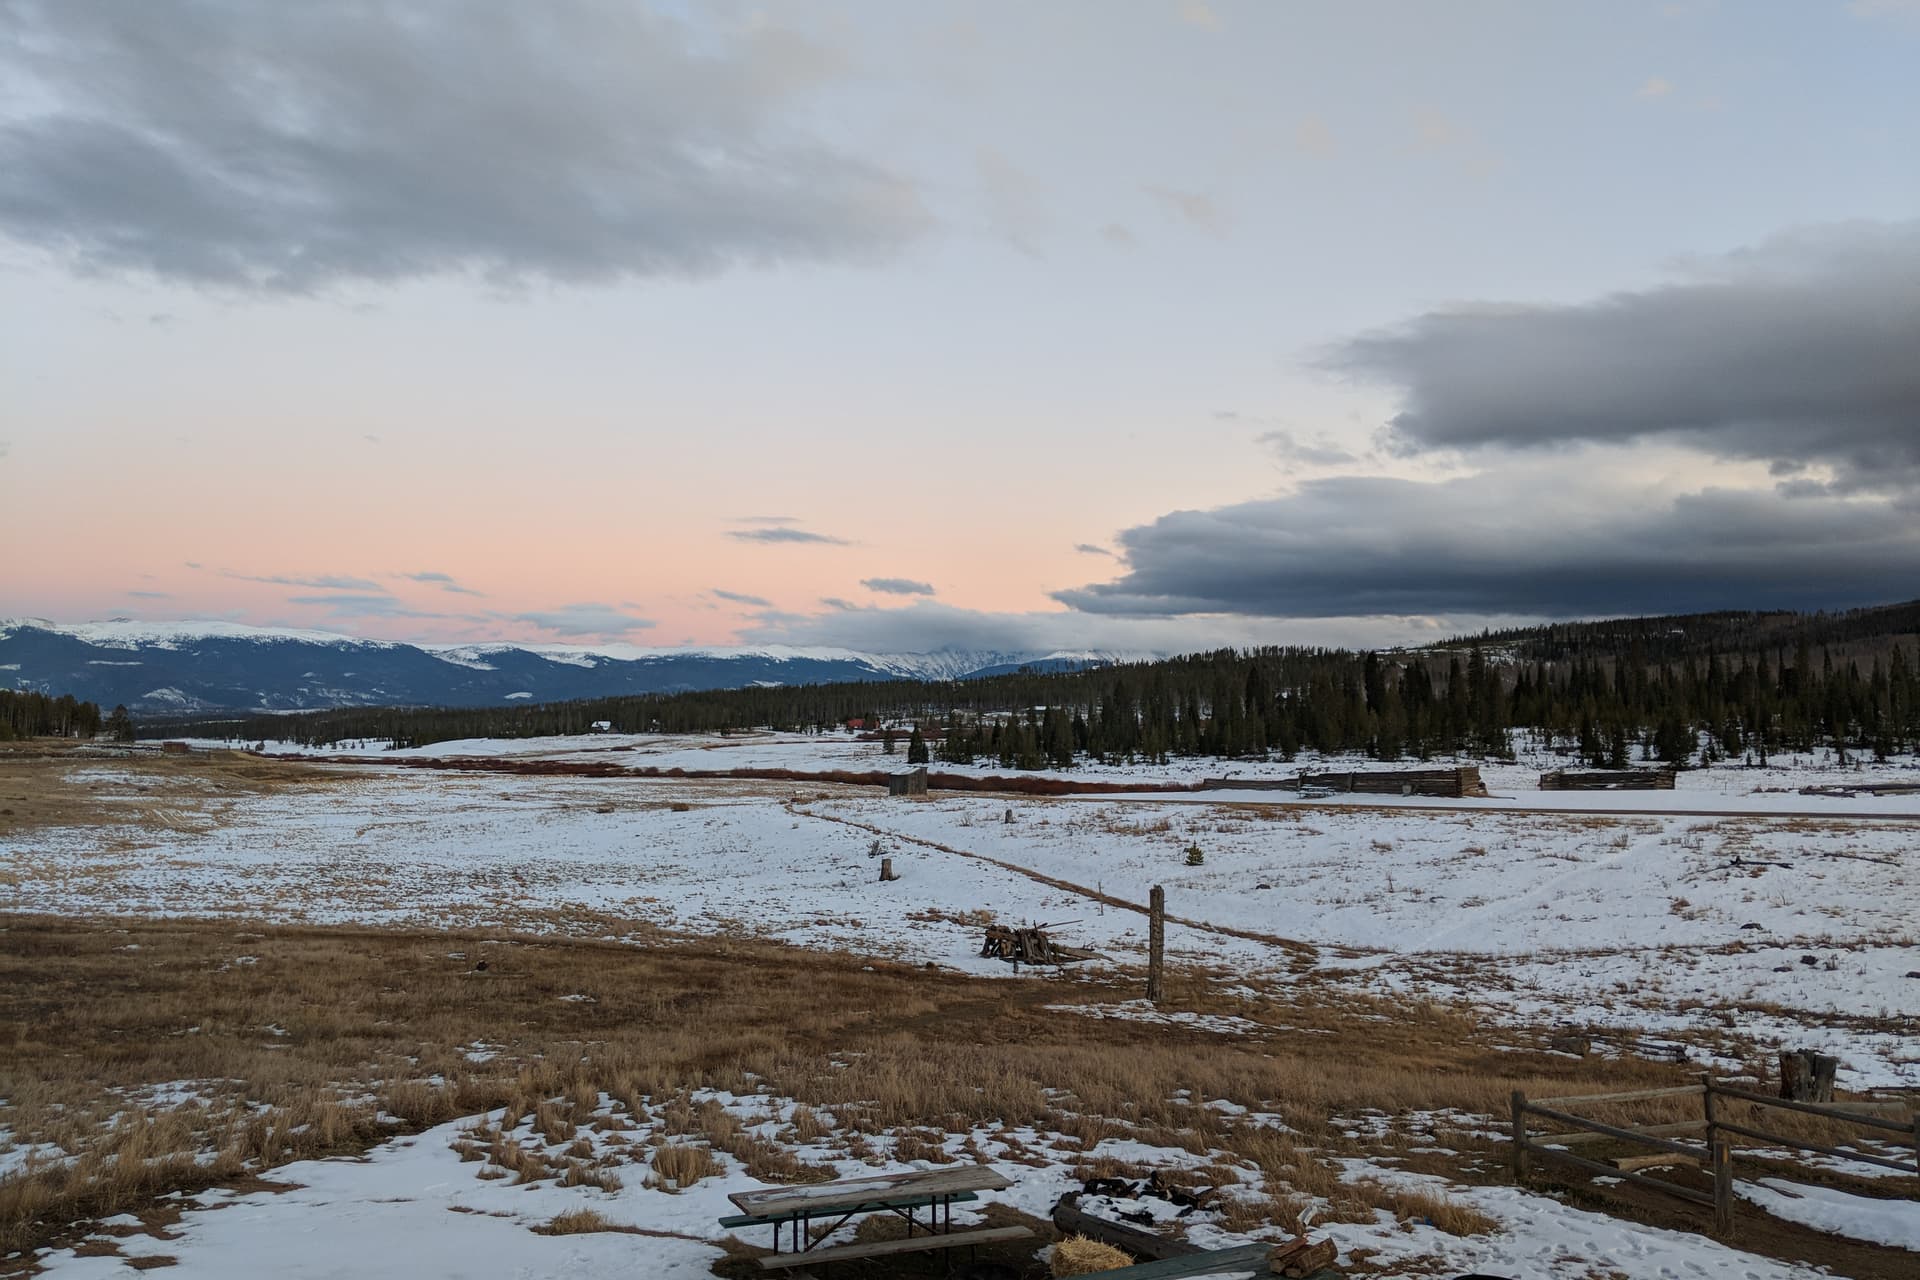 Looking out across a snowy high country ranch at sunset. In the distance, the Rocky Mountains.